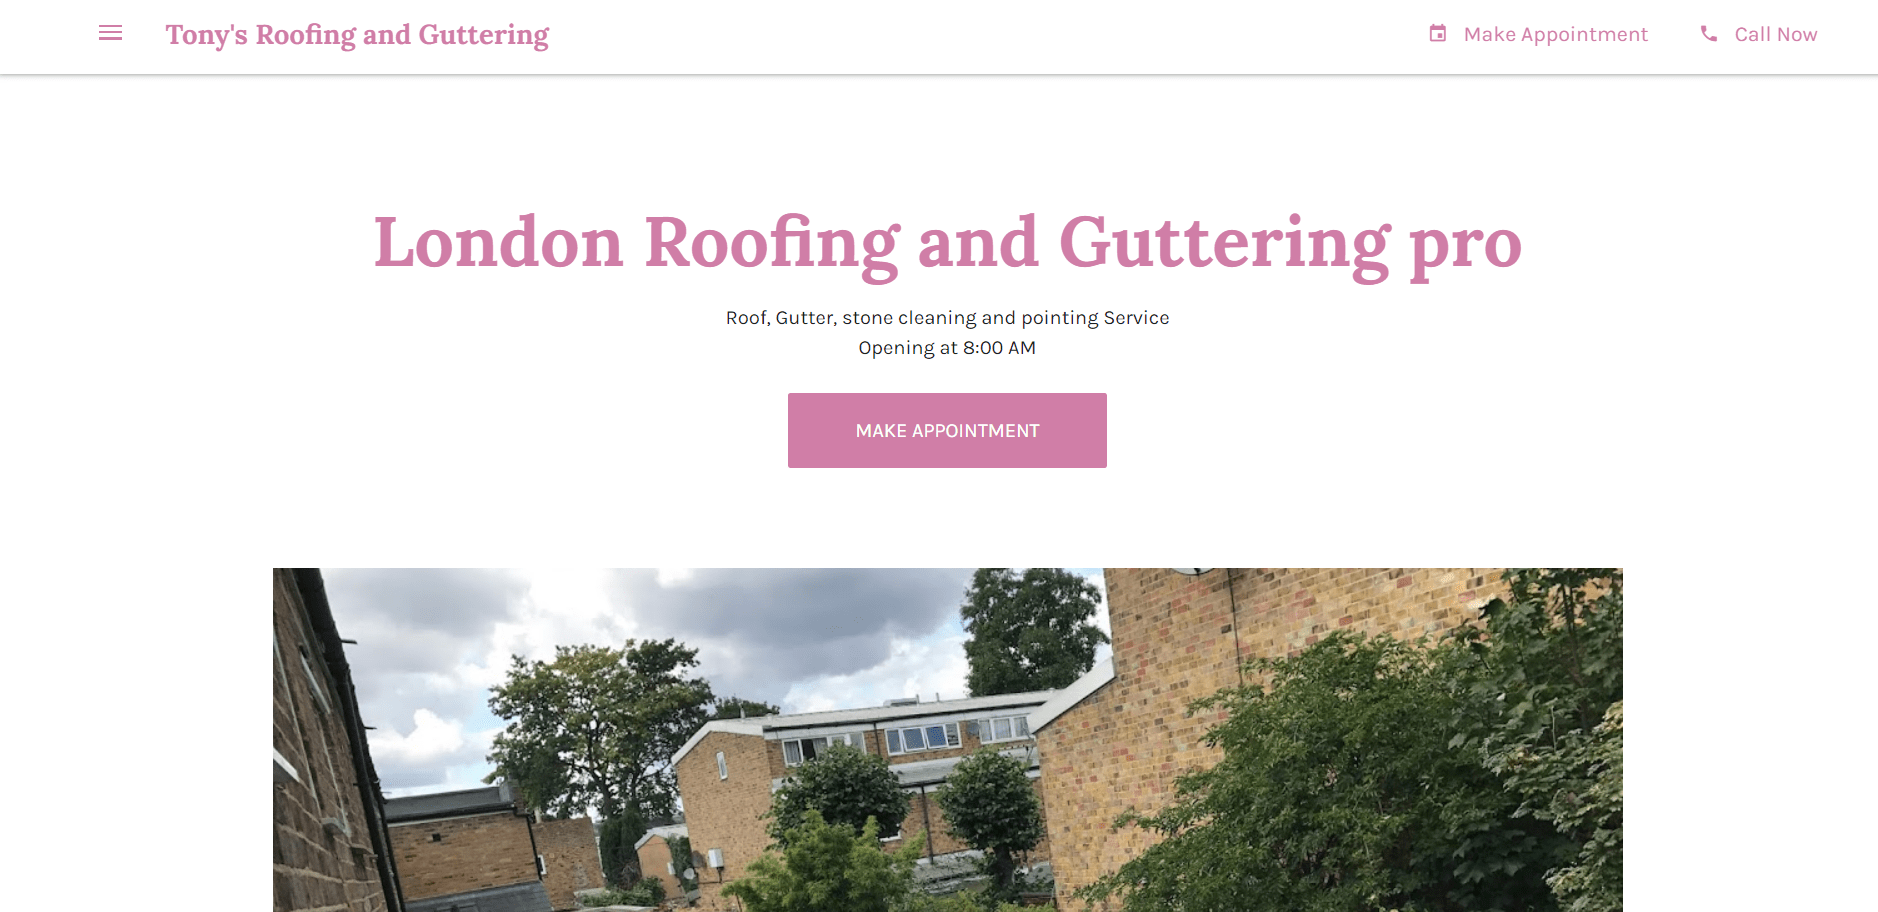 Tony’s Roofing & Guttering